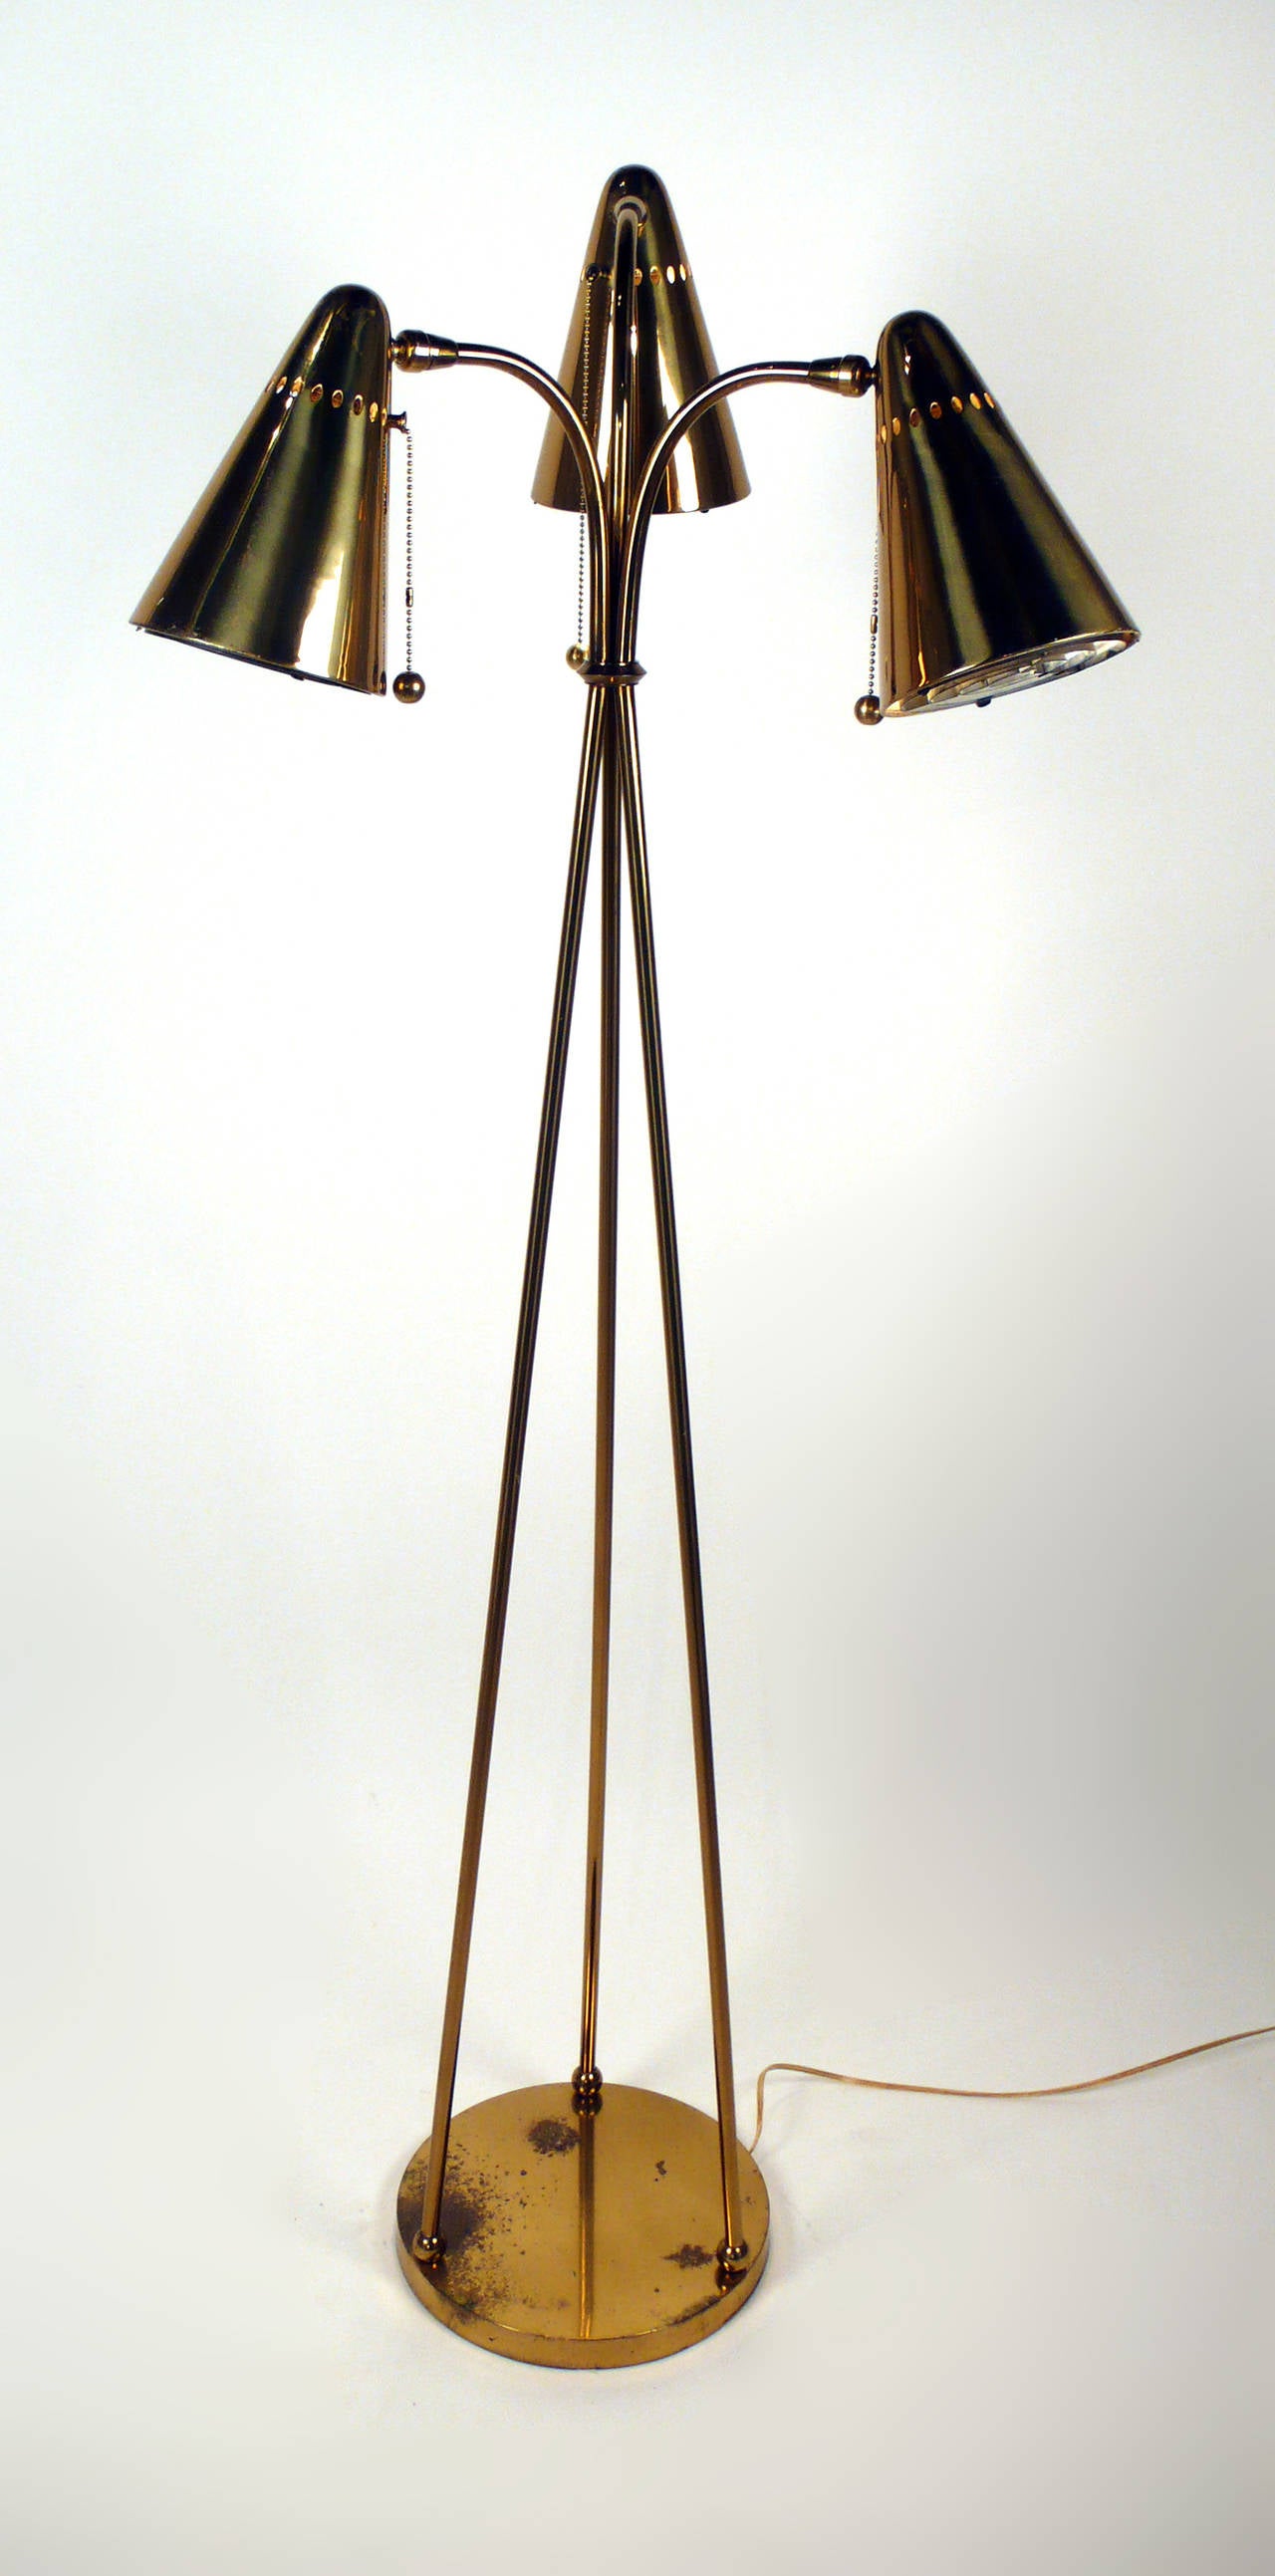 Unusual 1950s tripod floor lamp. Consists of three conical perforated brass shades with pull chain sockets and decorative brass balls. Professionally re-wired. Has similarities to lamps designed by Gerald Thurston, Ben Seibel, Gino Sarfatti and